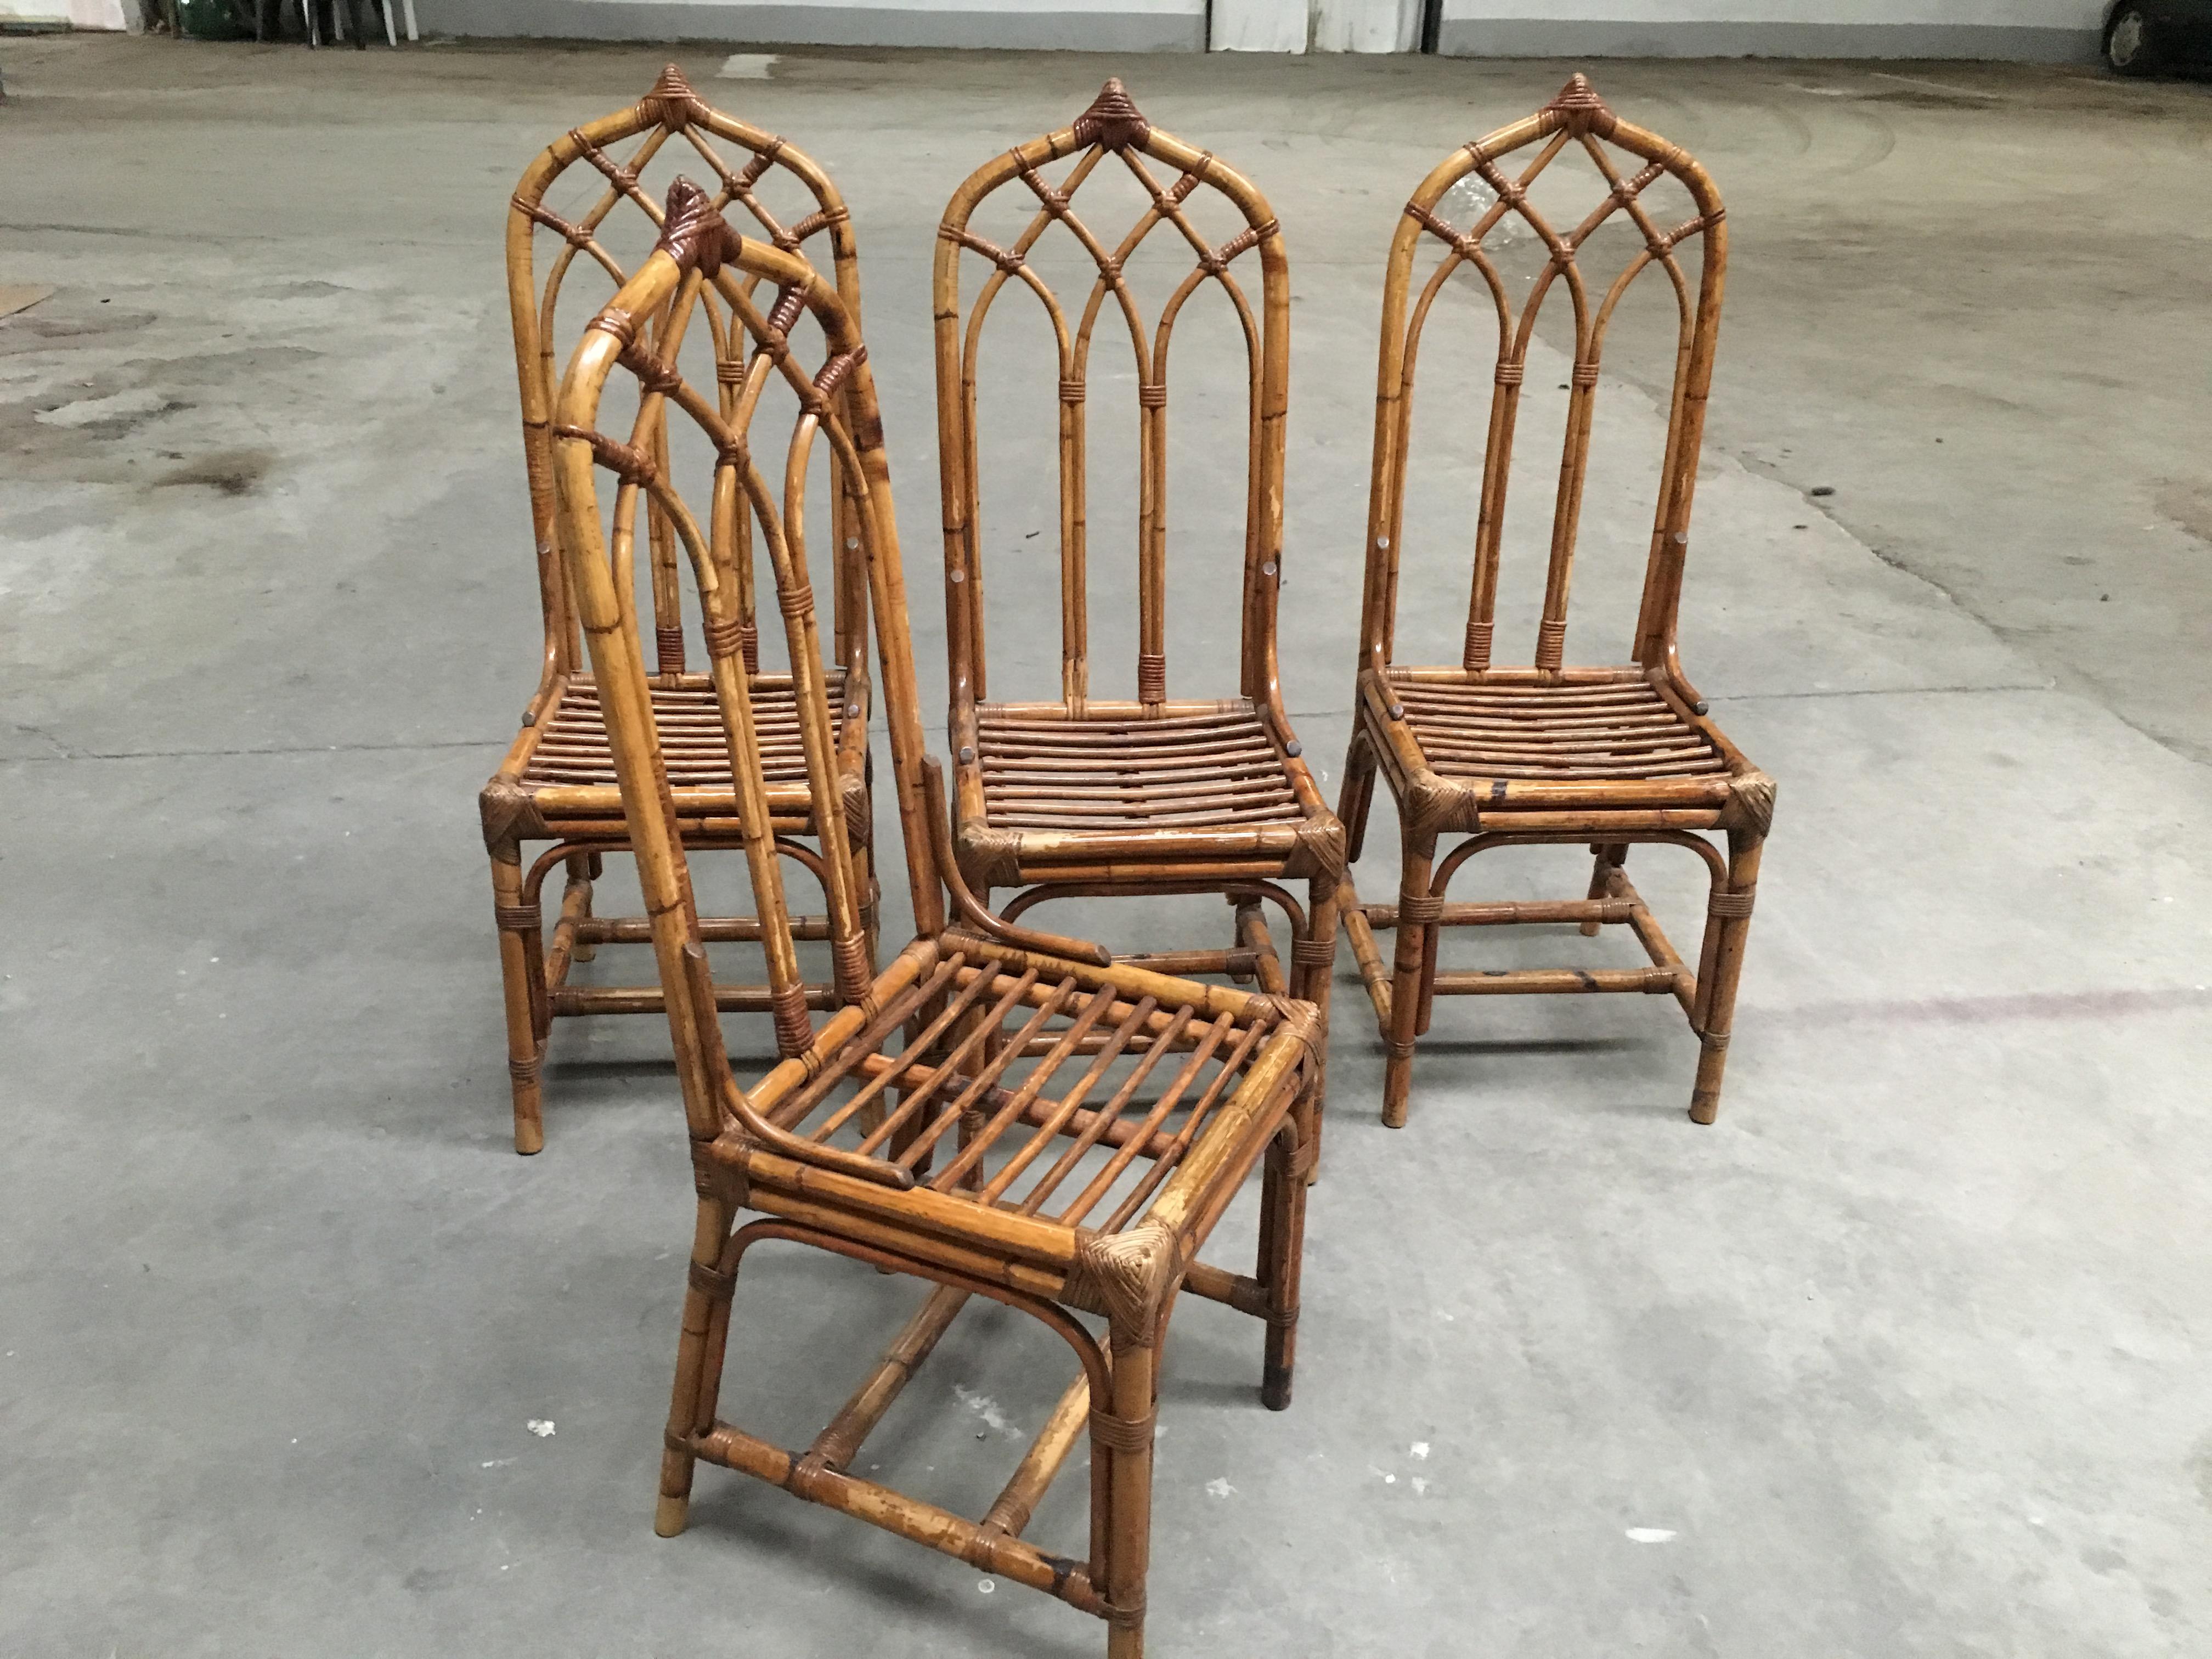 Mid-Century Modern Italian Set of Four Bamboo and Rattan Chairs, 1960s (Moderne der Mitte des Jahrhunderts)